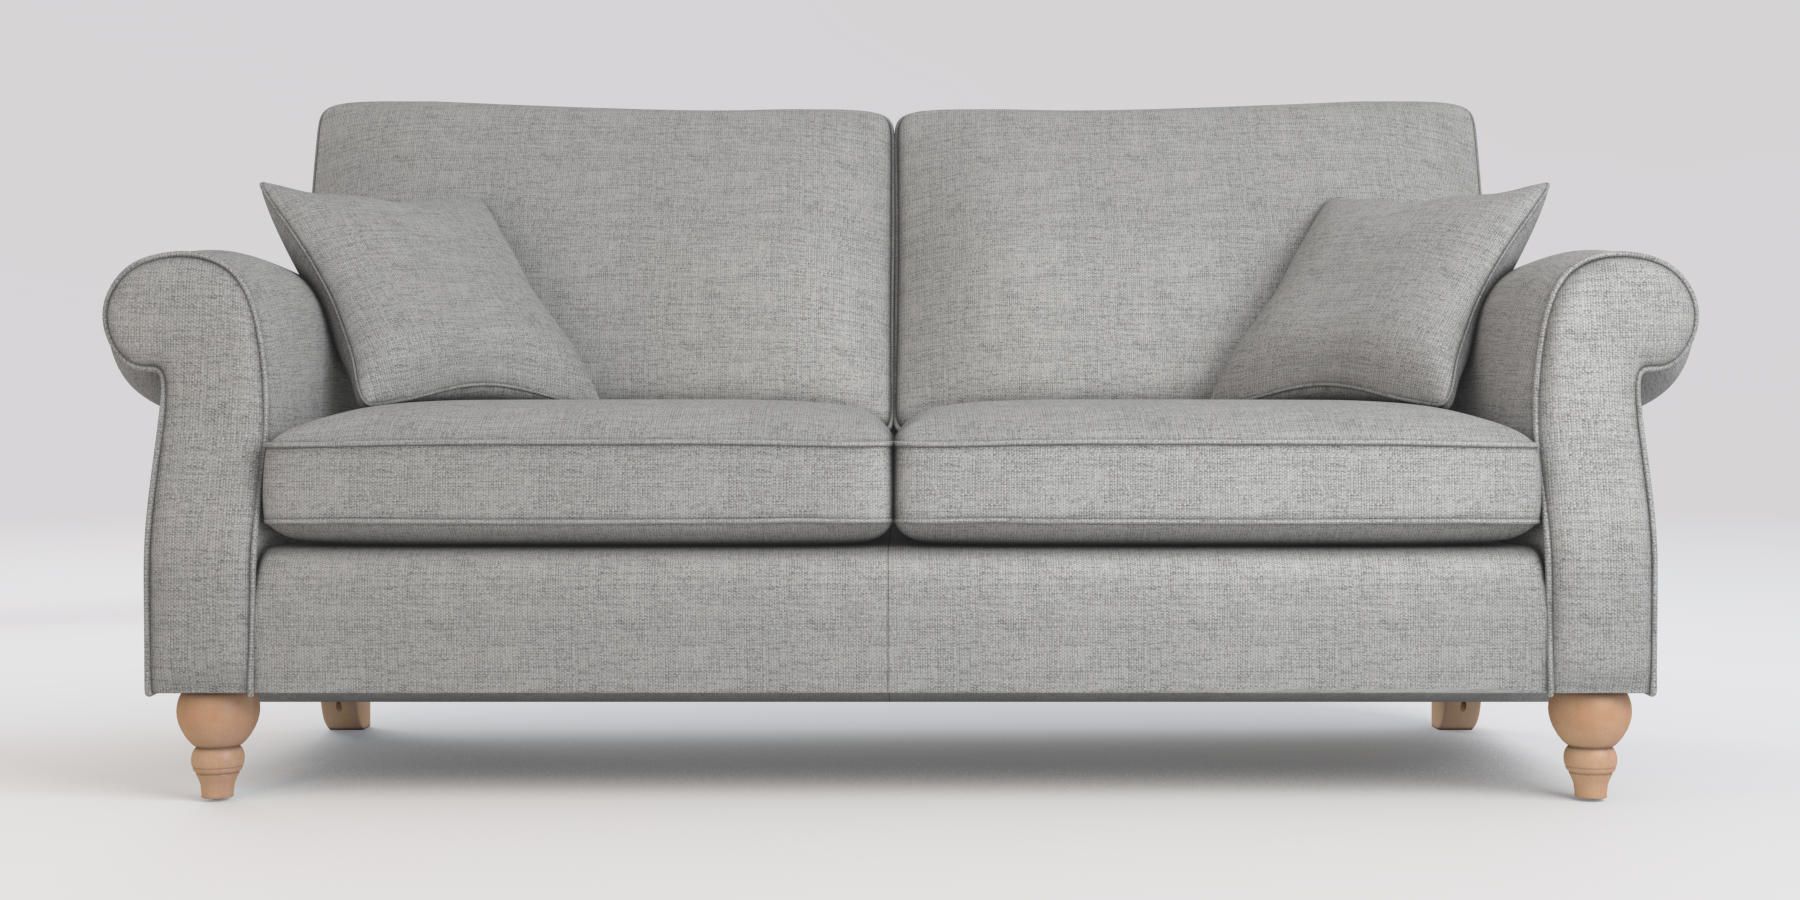 Buy Ashford Firm Sit Large Sofa (3 Seats) Textured Weave With Calvin Concrete Gray Sofas (View 13 of 15)